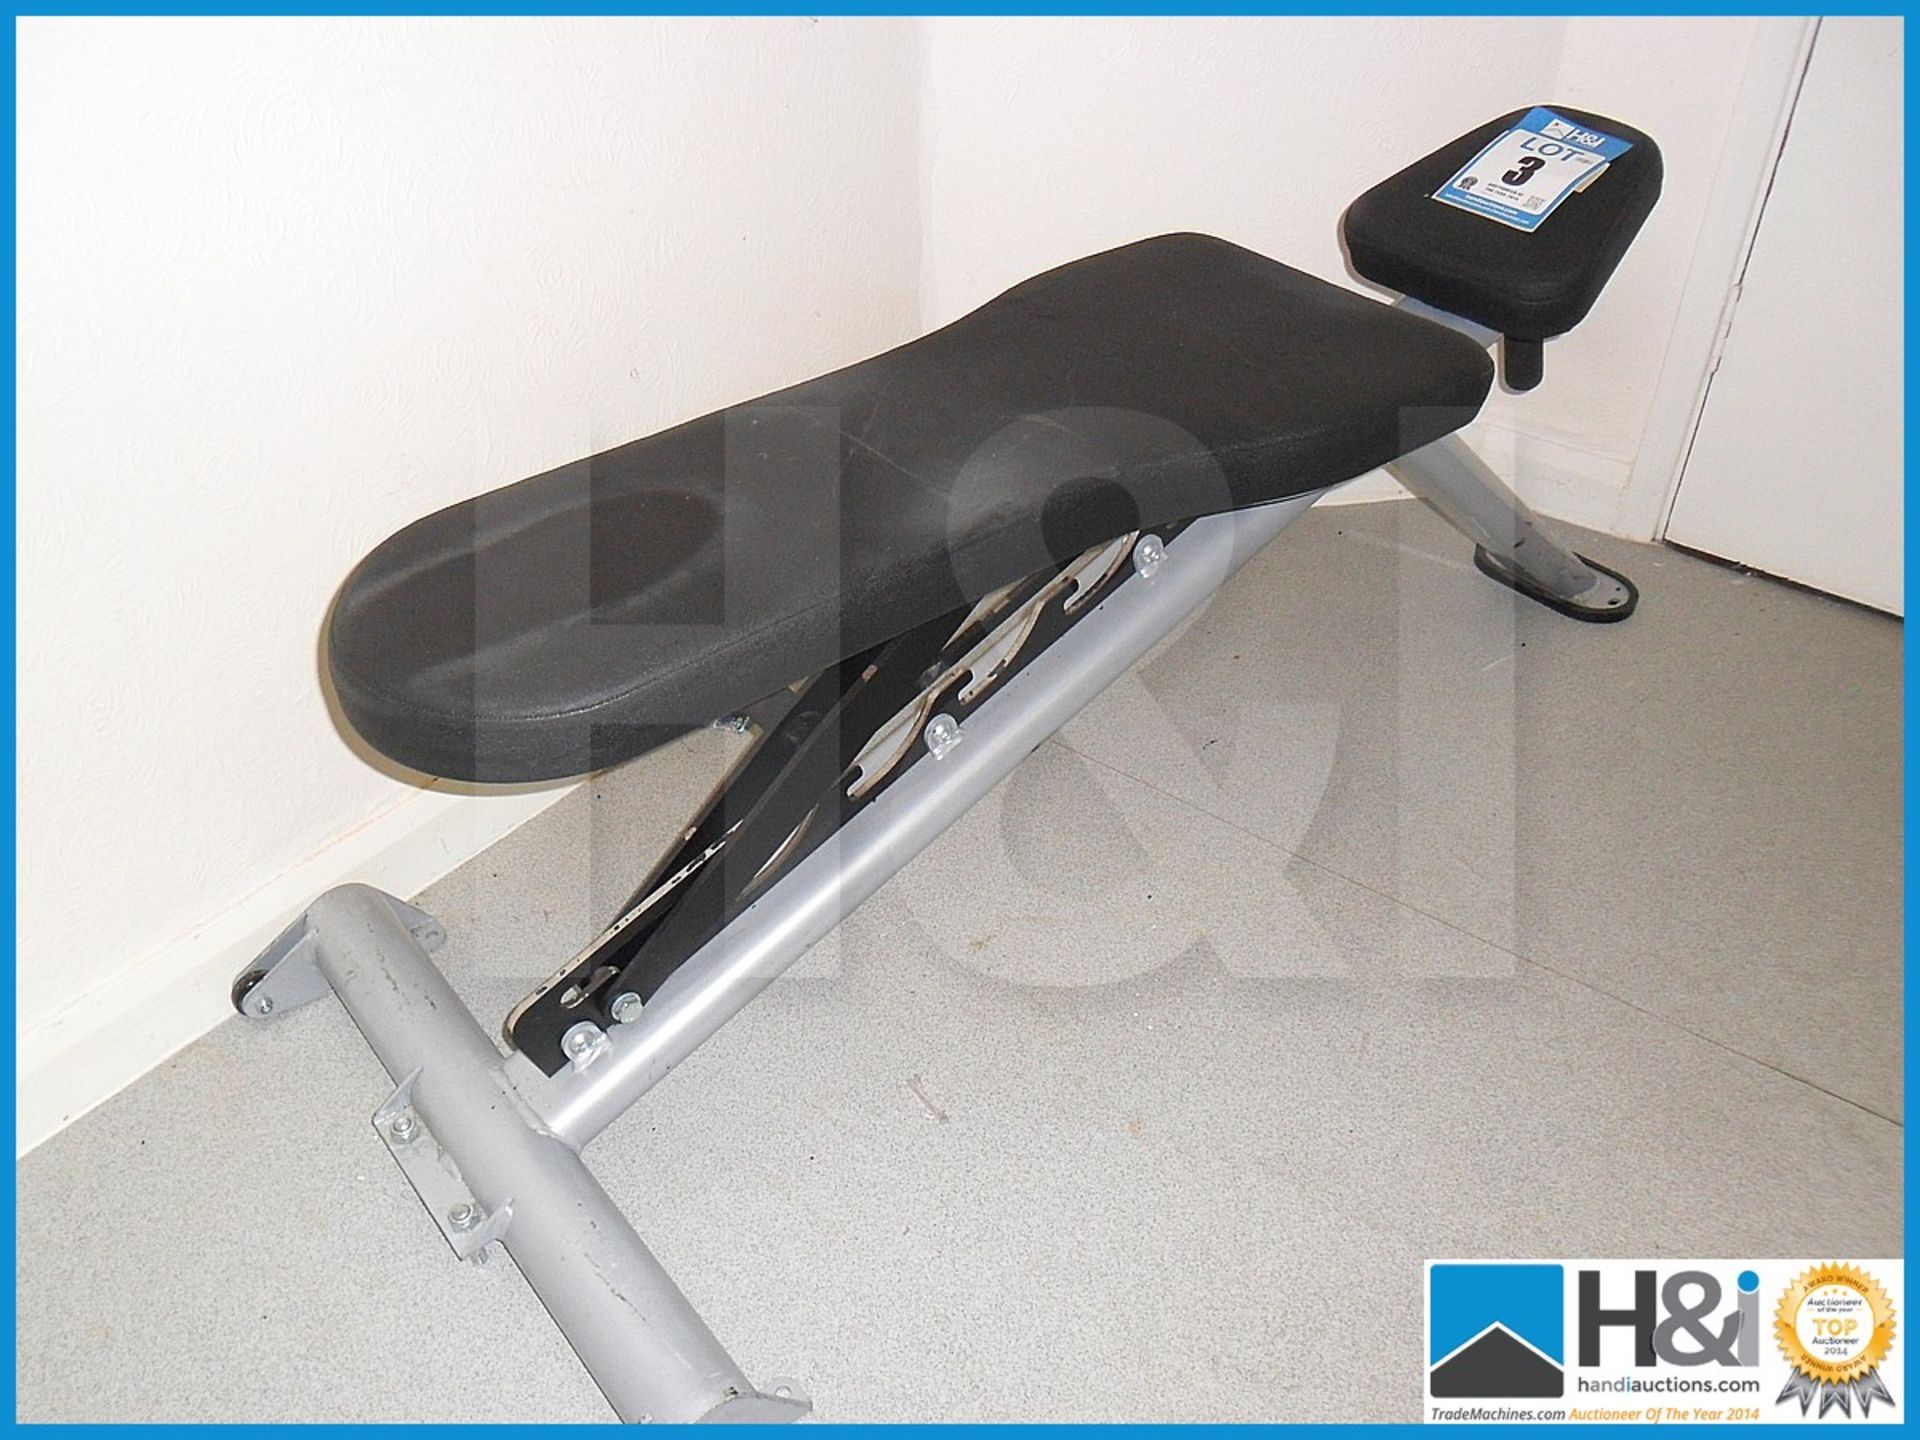 Adjustable workout bench in excellent condition - Image 2 of 2